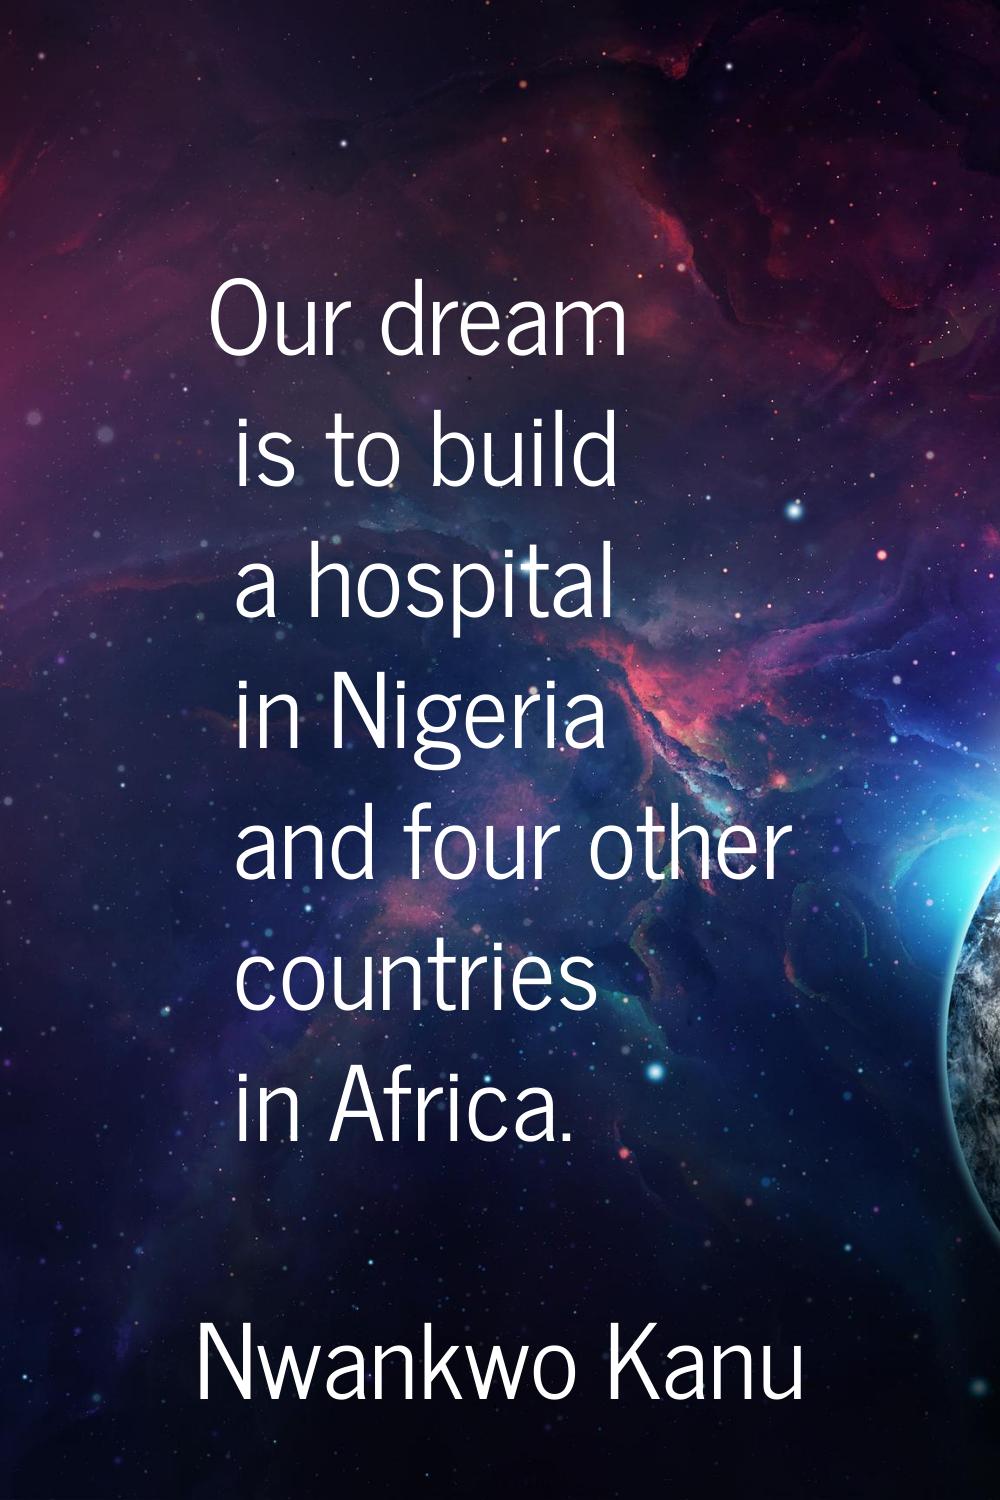 Our dream is to build a hospital in Nigeria and four other countries in Africa.